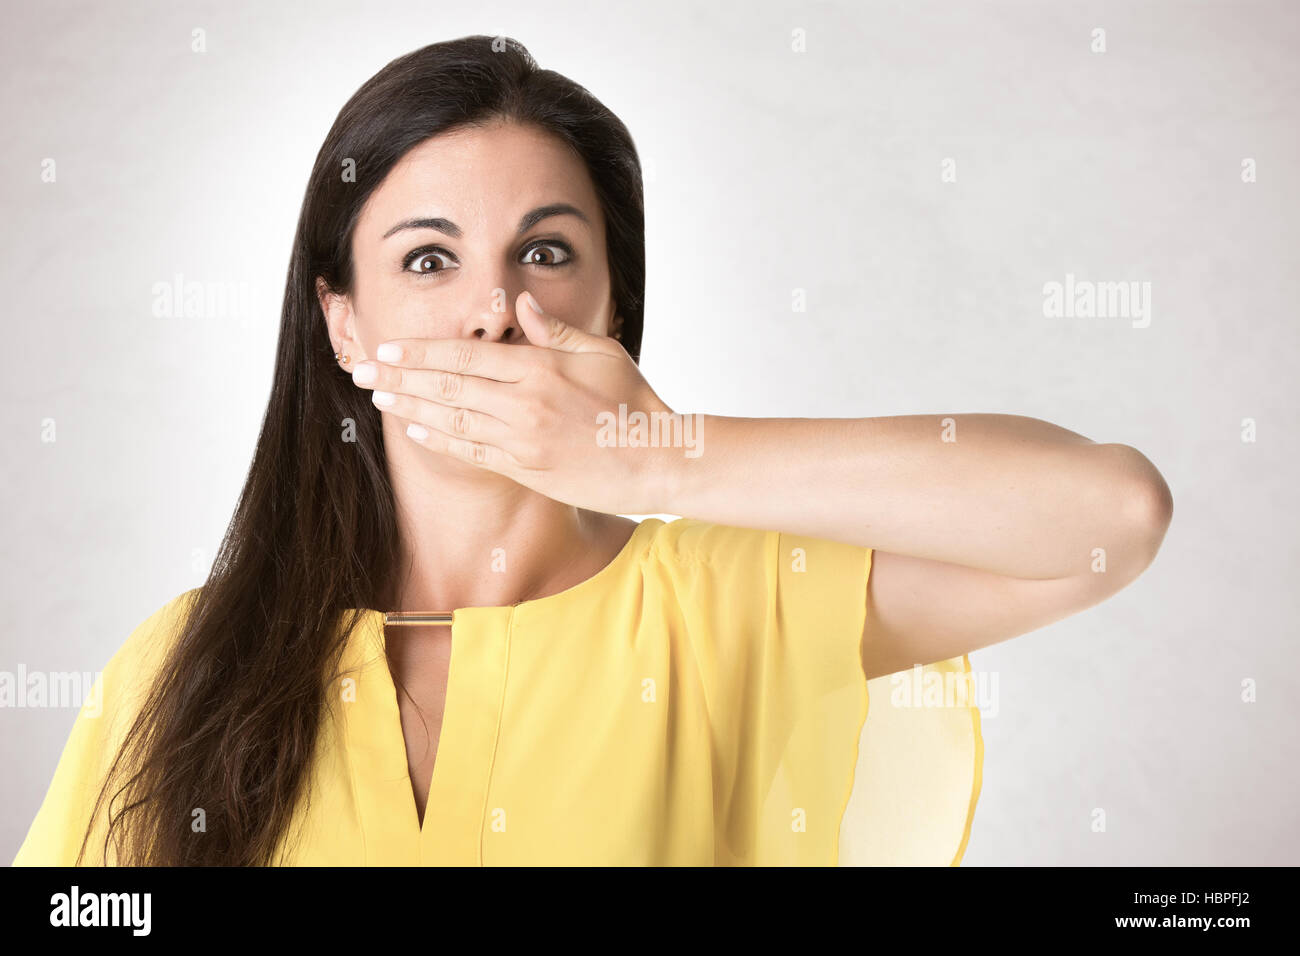 Female Covering Her mouth Stock Photo